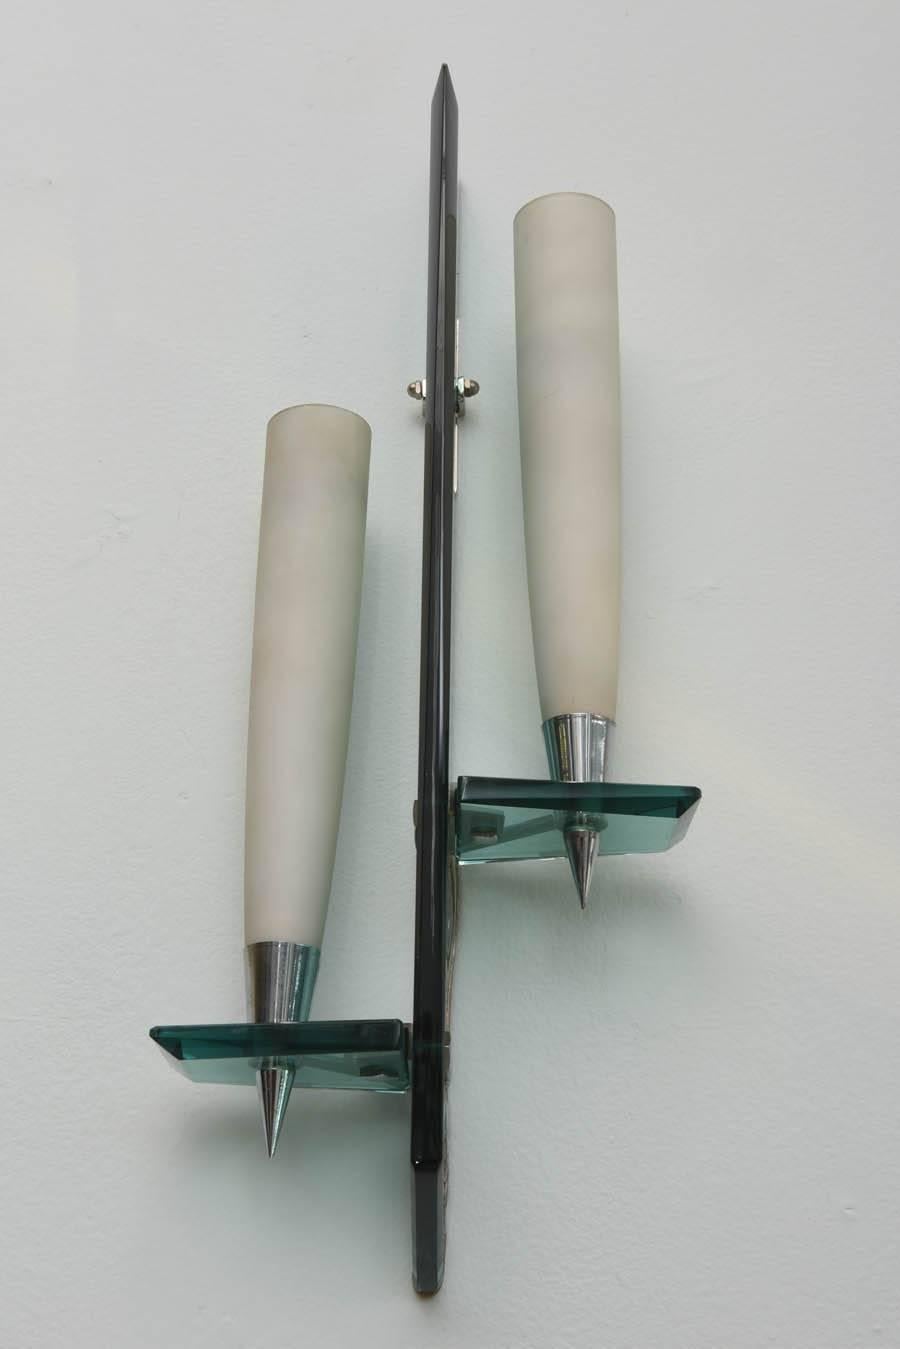 Pair Italian Modern Wall Lights, Sconces, Max Ingrand for Fontana Arte, 1950 In Excellent Condition For Sale In Hollywood, FL